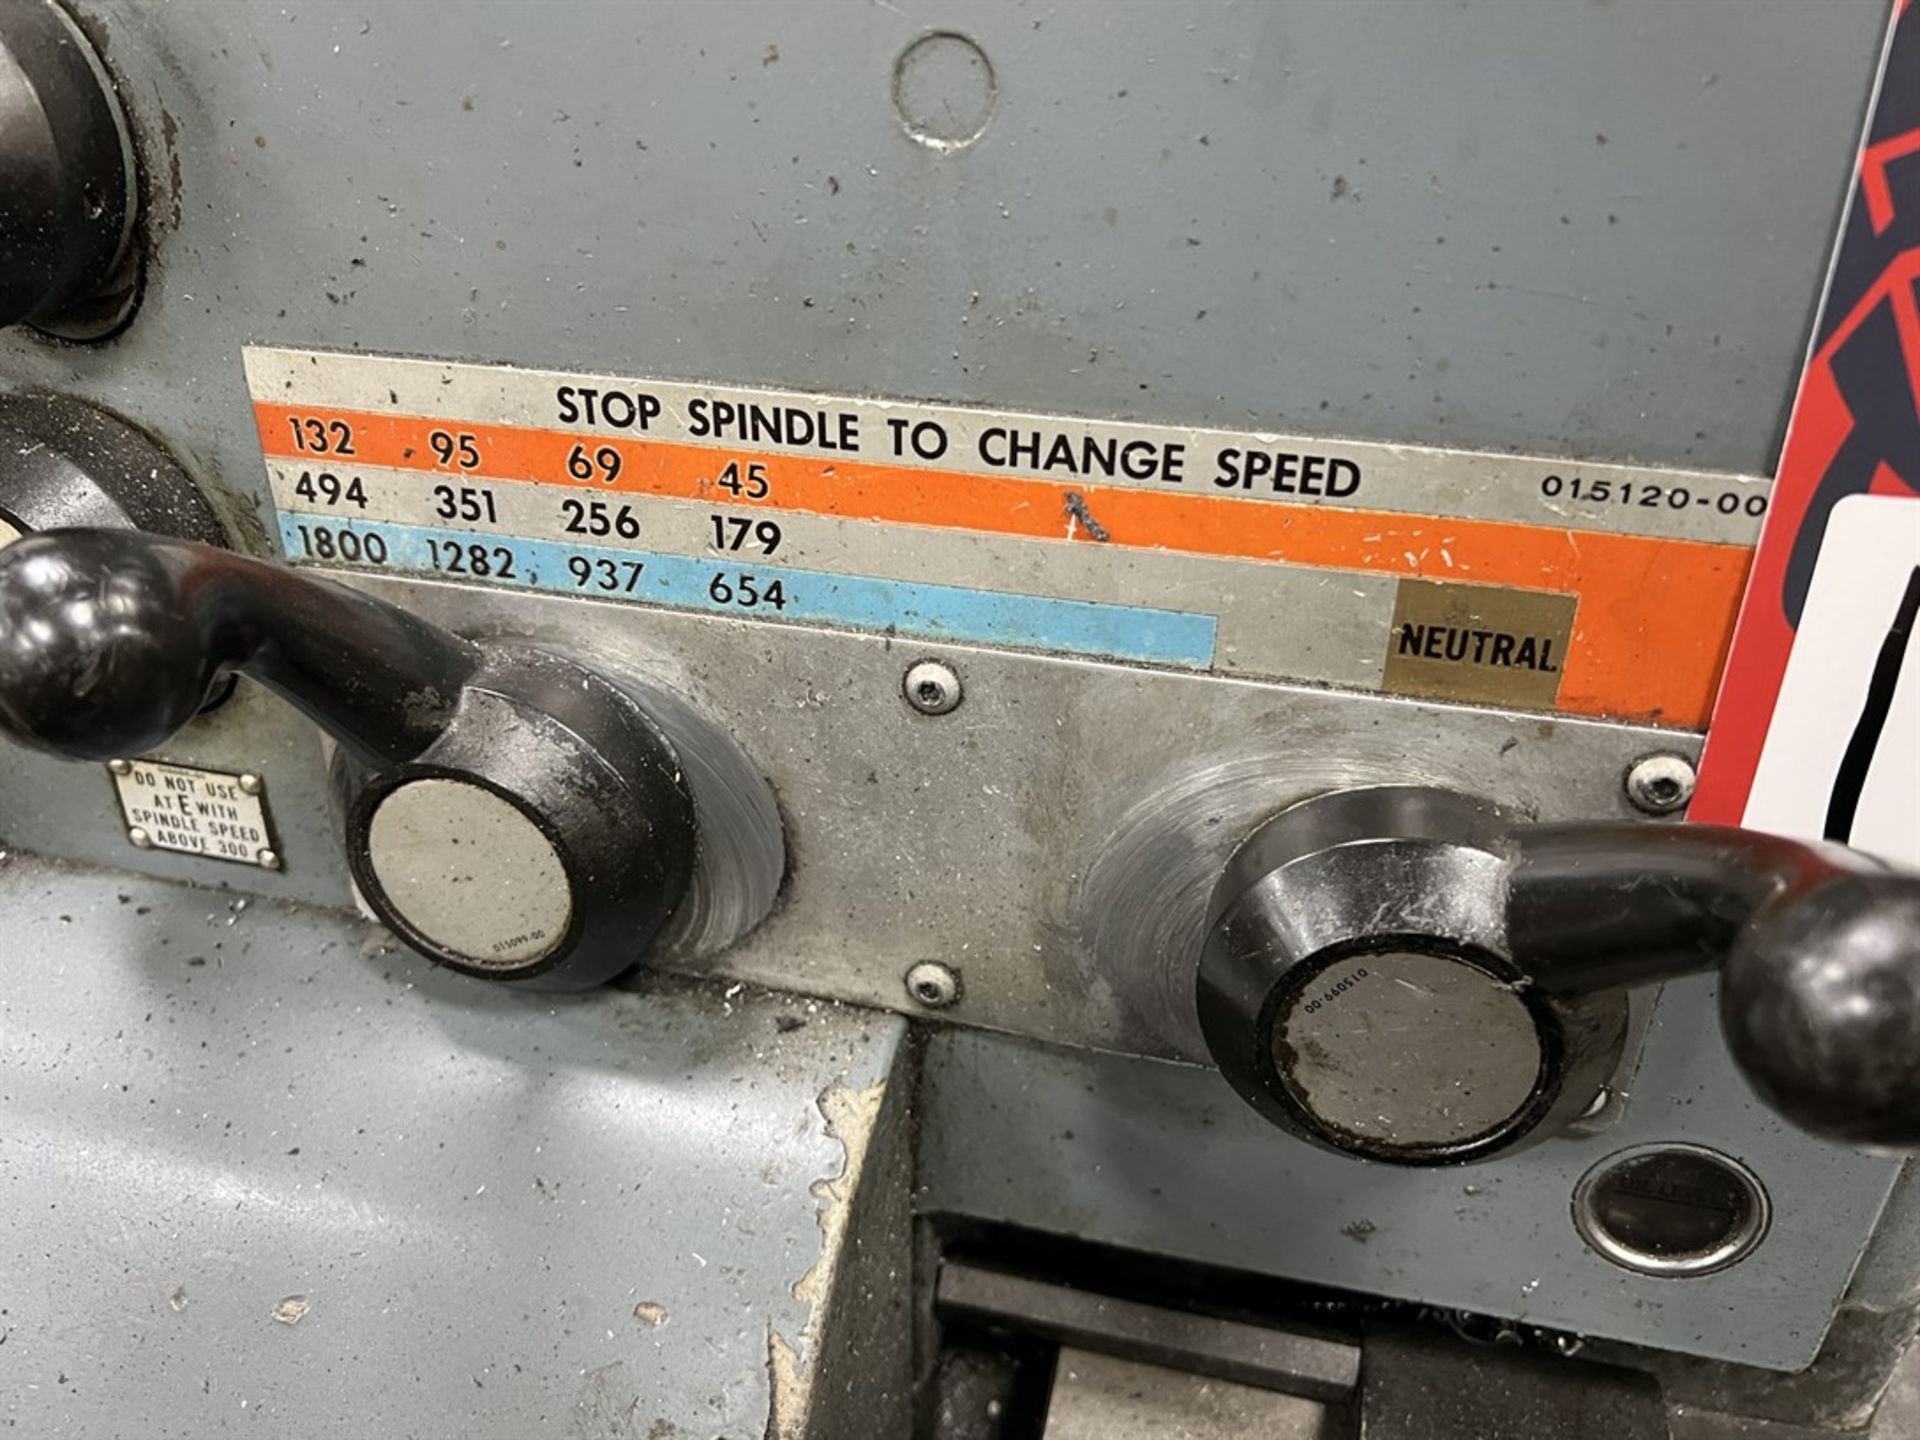 LEBLOND Regal 15”x 30” Tool Room Lathe, s/n 8C4148, 2J Speed Collet Chuck, Quick Change Tool Post, - Image 10 of 11